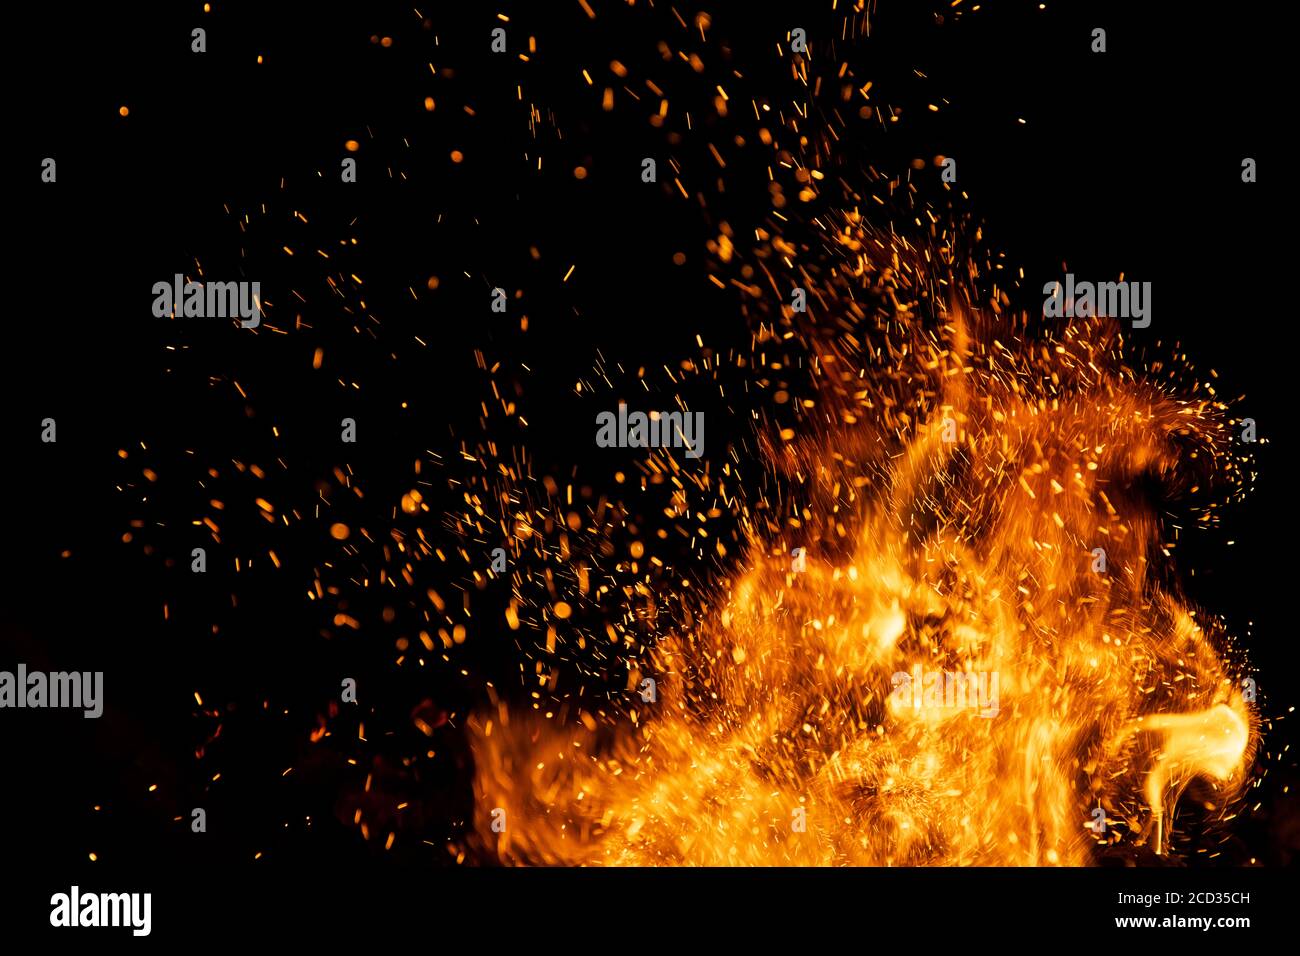 Fire sparks particles with flames isolated on black background Stock Photo  - Alamy